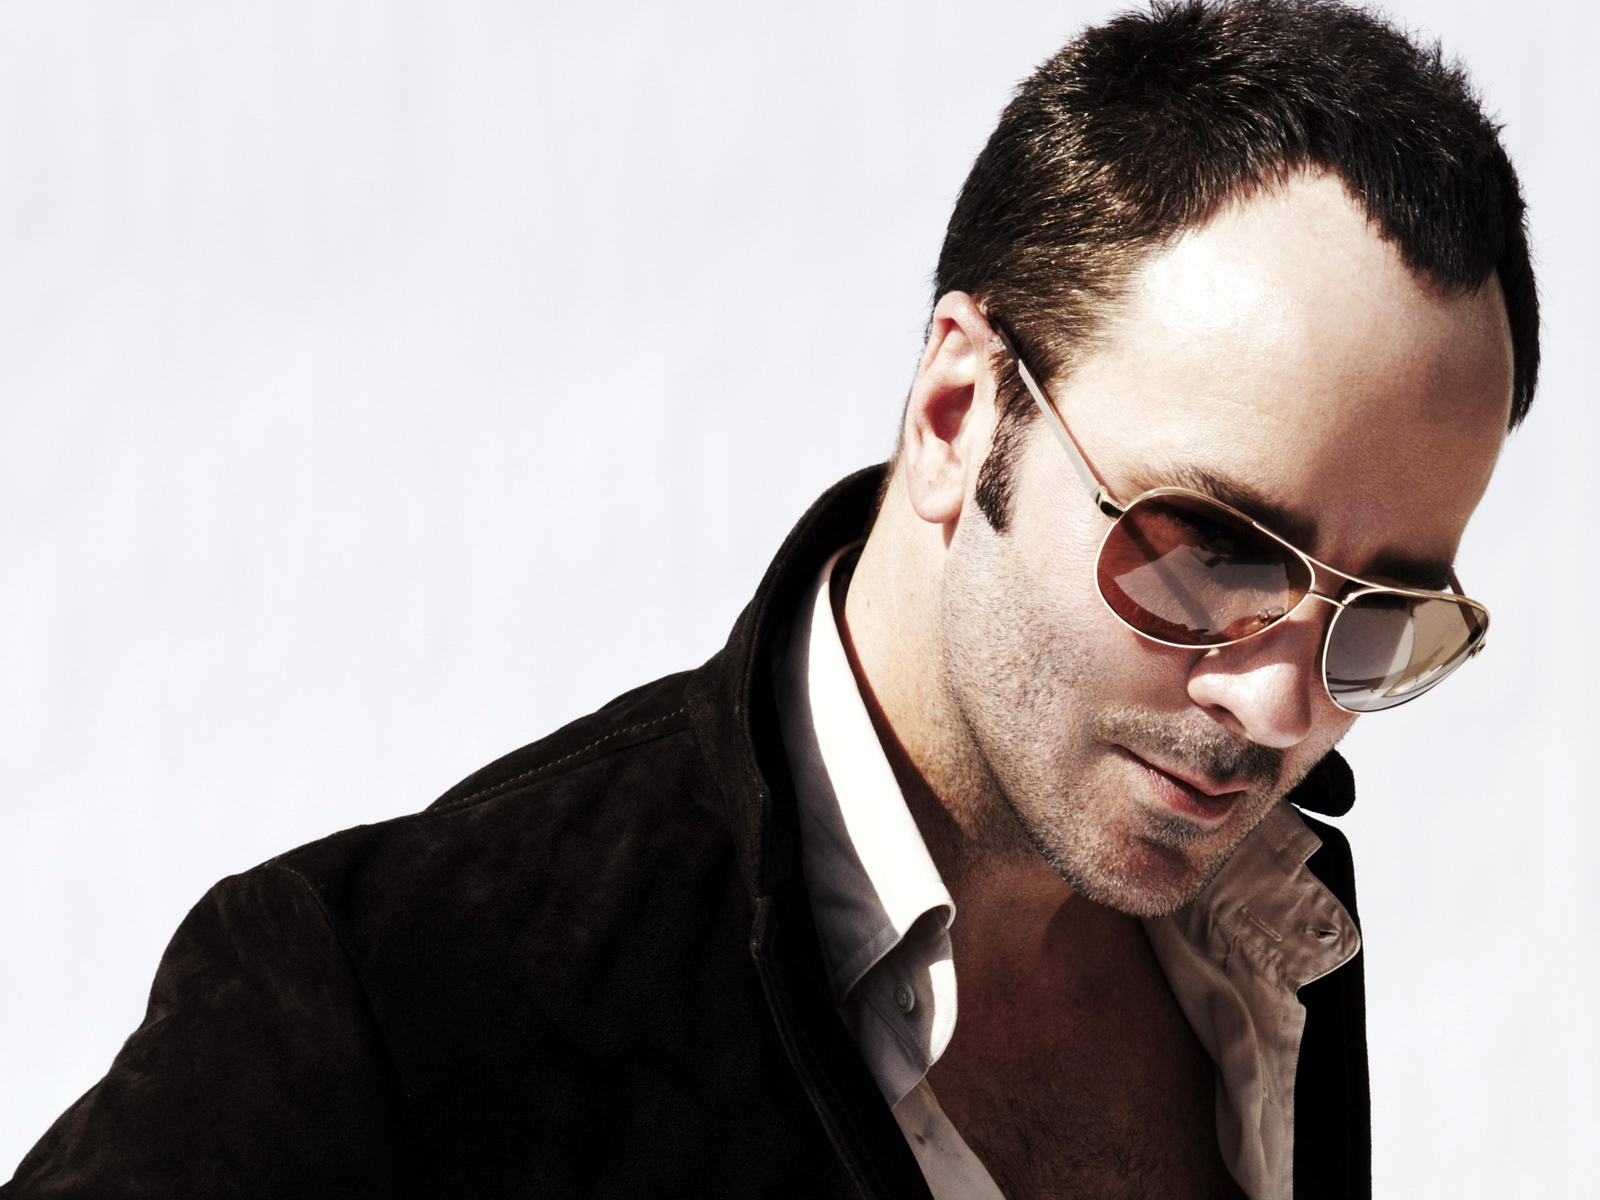 Men in Makeup: Yes or Yikes? Tom Ford Says YES and Is Selling Products!